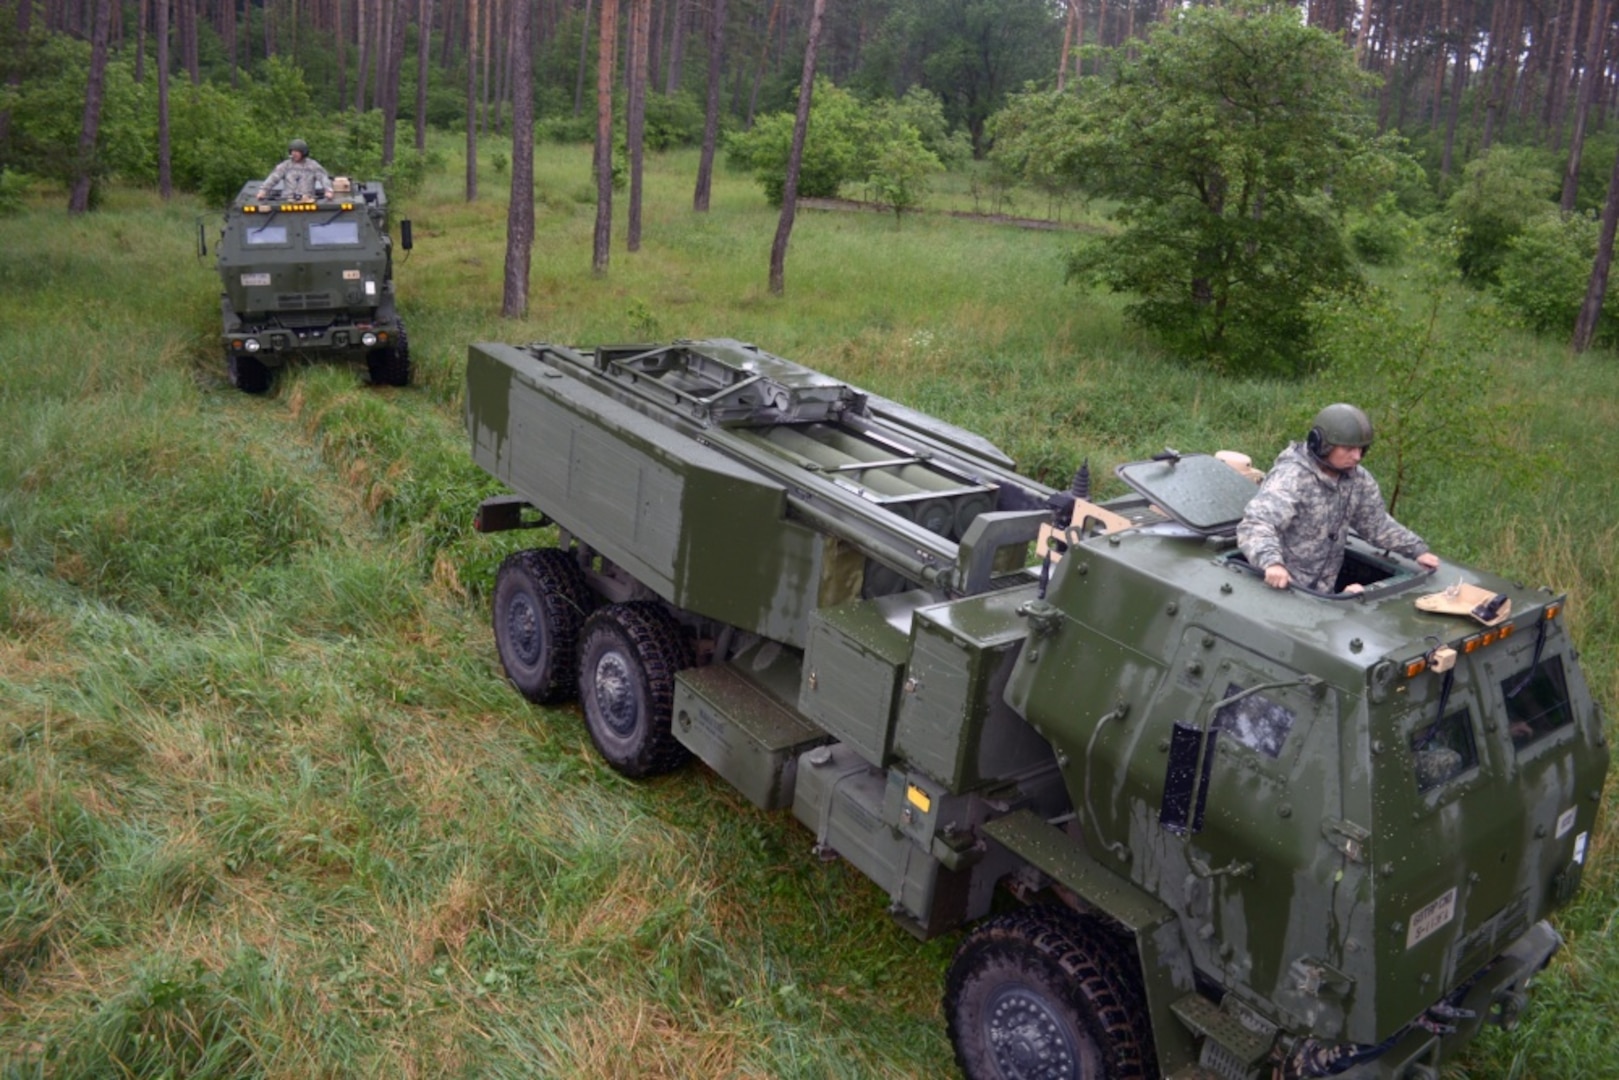 High Mobility Artillery Rocket Systems crews of the 5th Battalion, 113th Field Artillery Regiment, North Carolina Army National Guard, travel throughout training areas in Drawsko Pomorski, Poland, as part of Exercise Anakonda 16 June 1, 2016. AN16 is a Polish national exercise that seeks to train, exercise and integrate Polish national command and force structures into an allied, joint and multinational environment. 